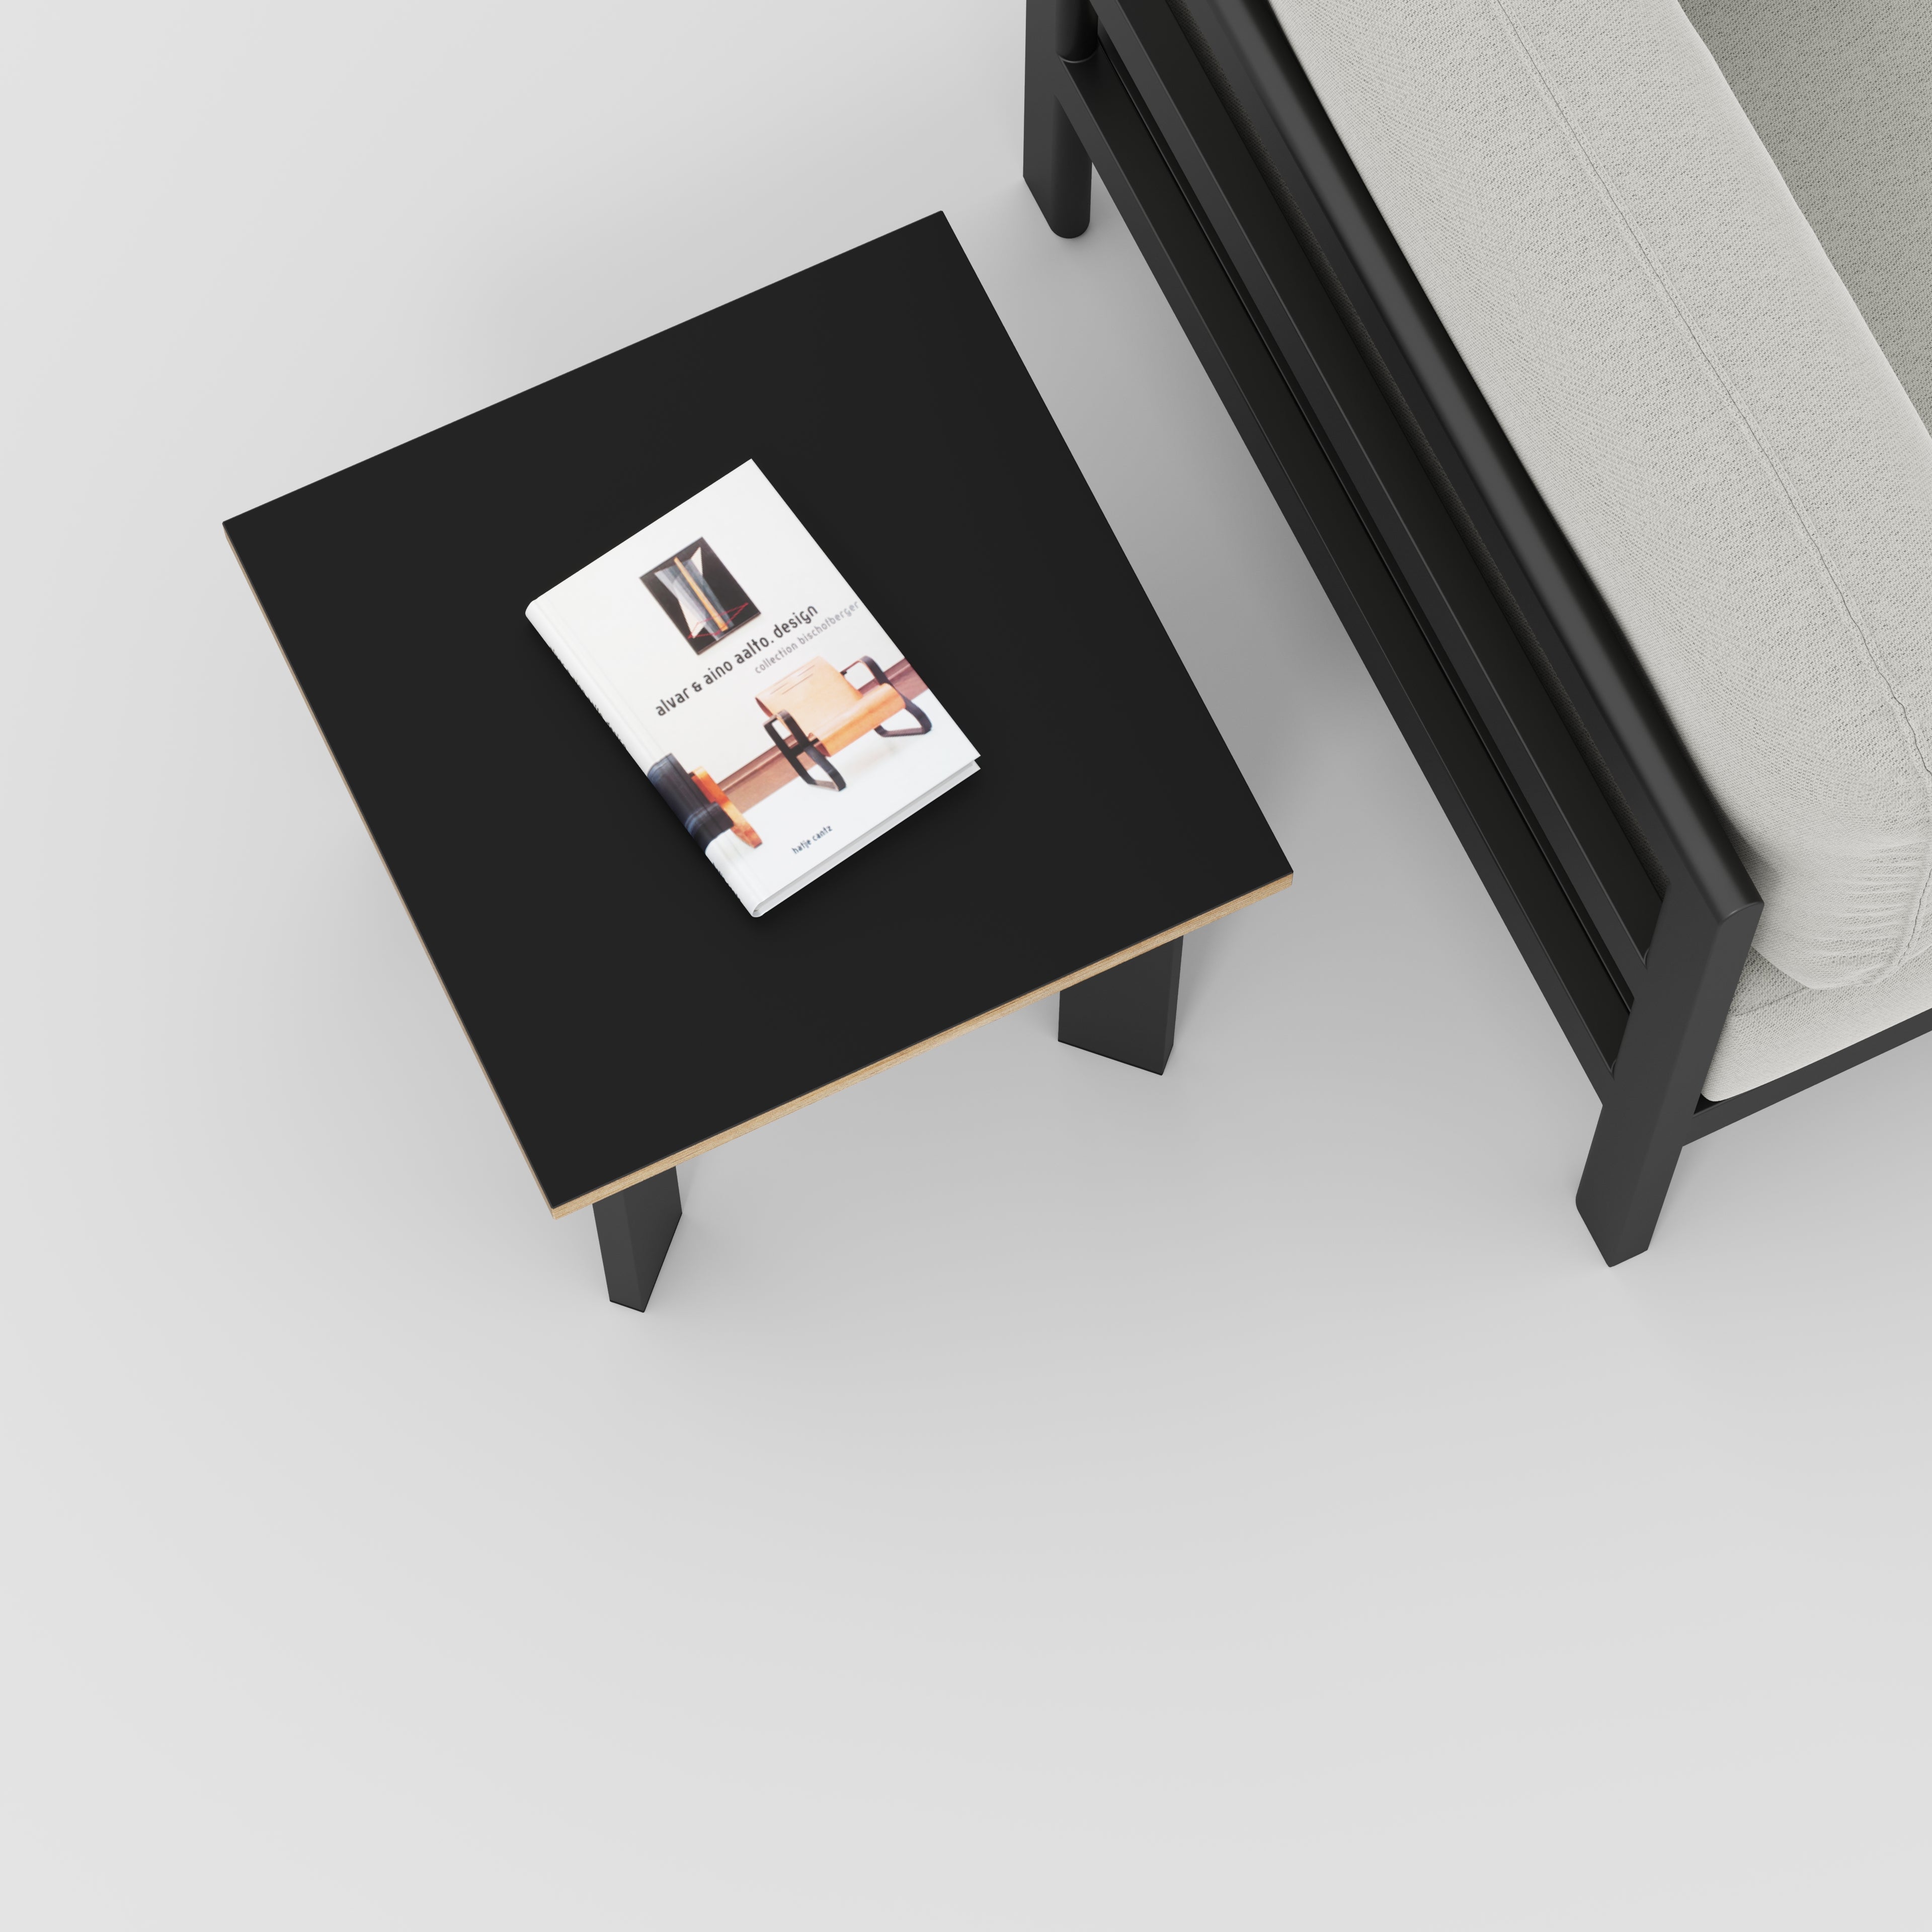 Side Table with Rectangular Single Pin Legs - Formica Diamond Black - 500(w) x 500(d) x 425(h)